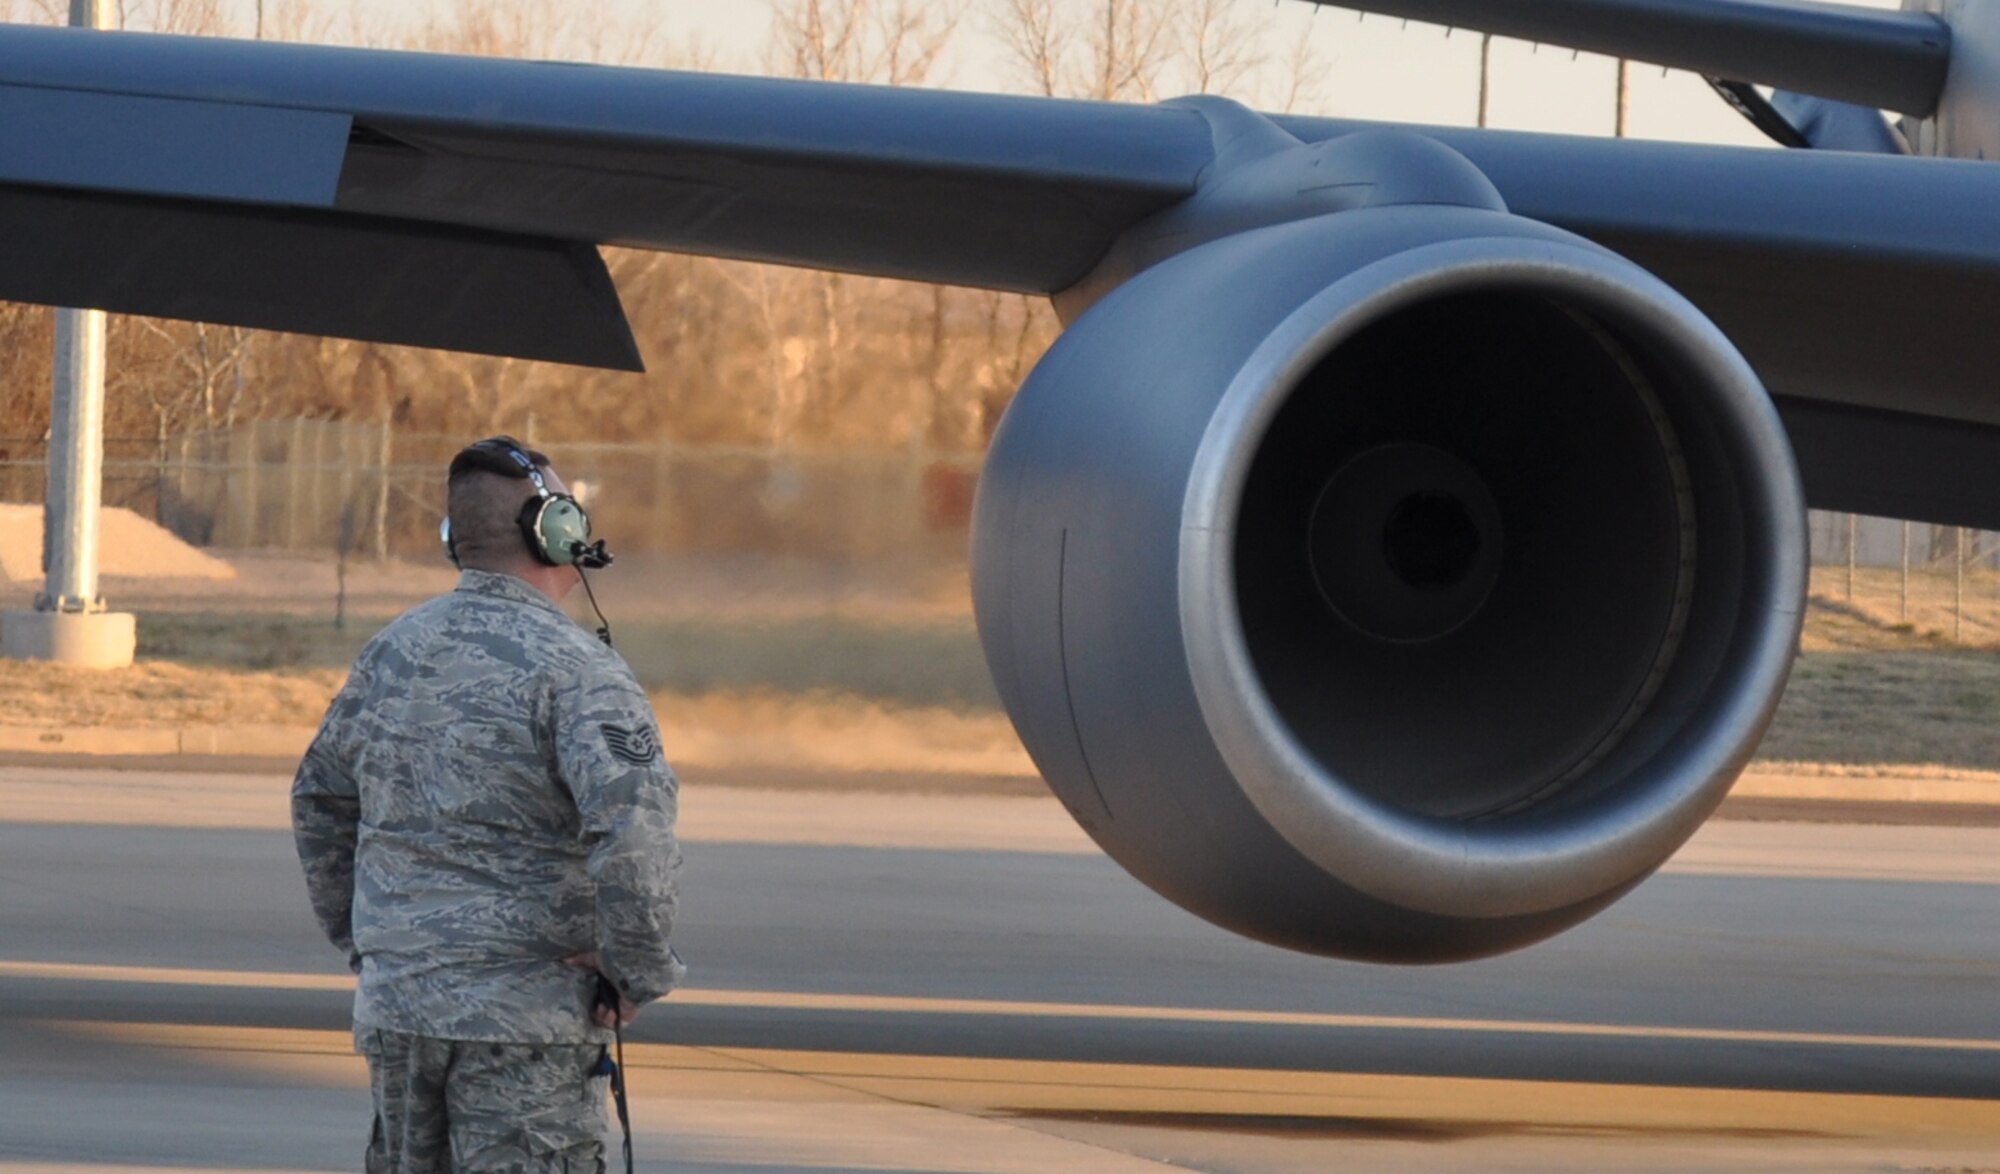 Tech Sgt. Jonathan Sanders monitors engine start up here Wednesday for a 137th Air Refueling Wing, Oklahoma Air National Guard evening mission Feb. 6.   The mission of the 137th ARW and 507th ARW continues daily providing air refueling worldwide.  (U.S. Air Force Photo by Capt. Jon Quinlan)